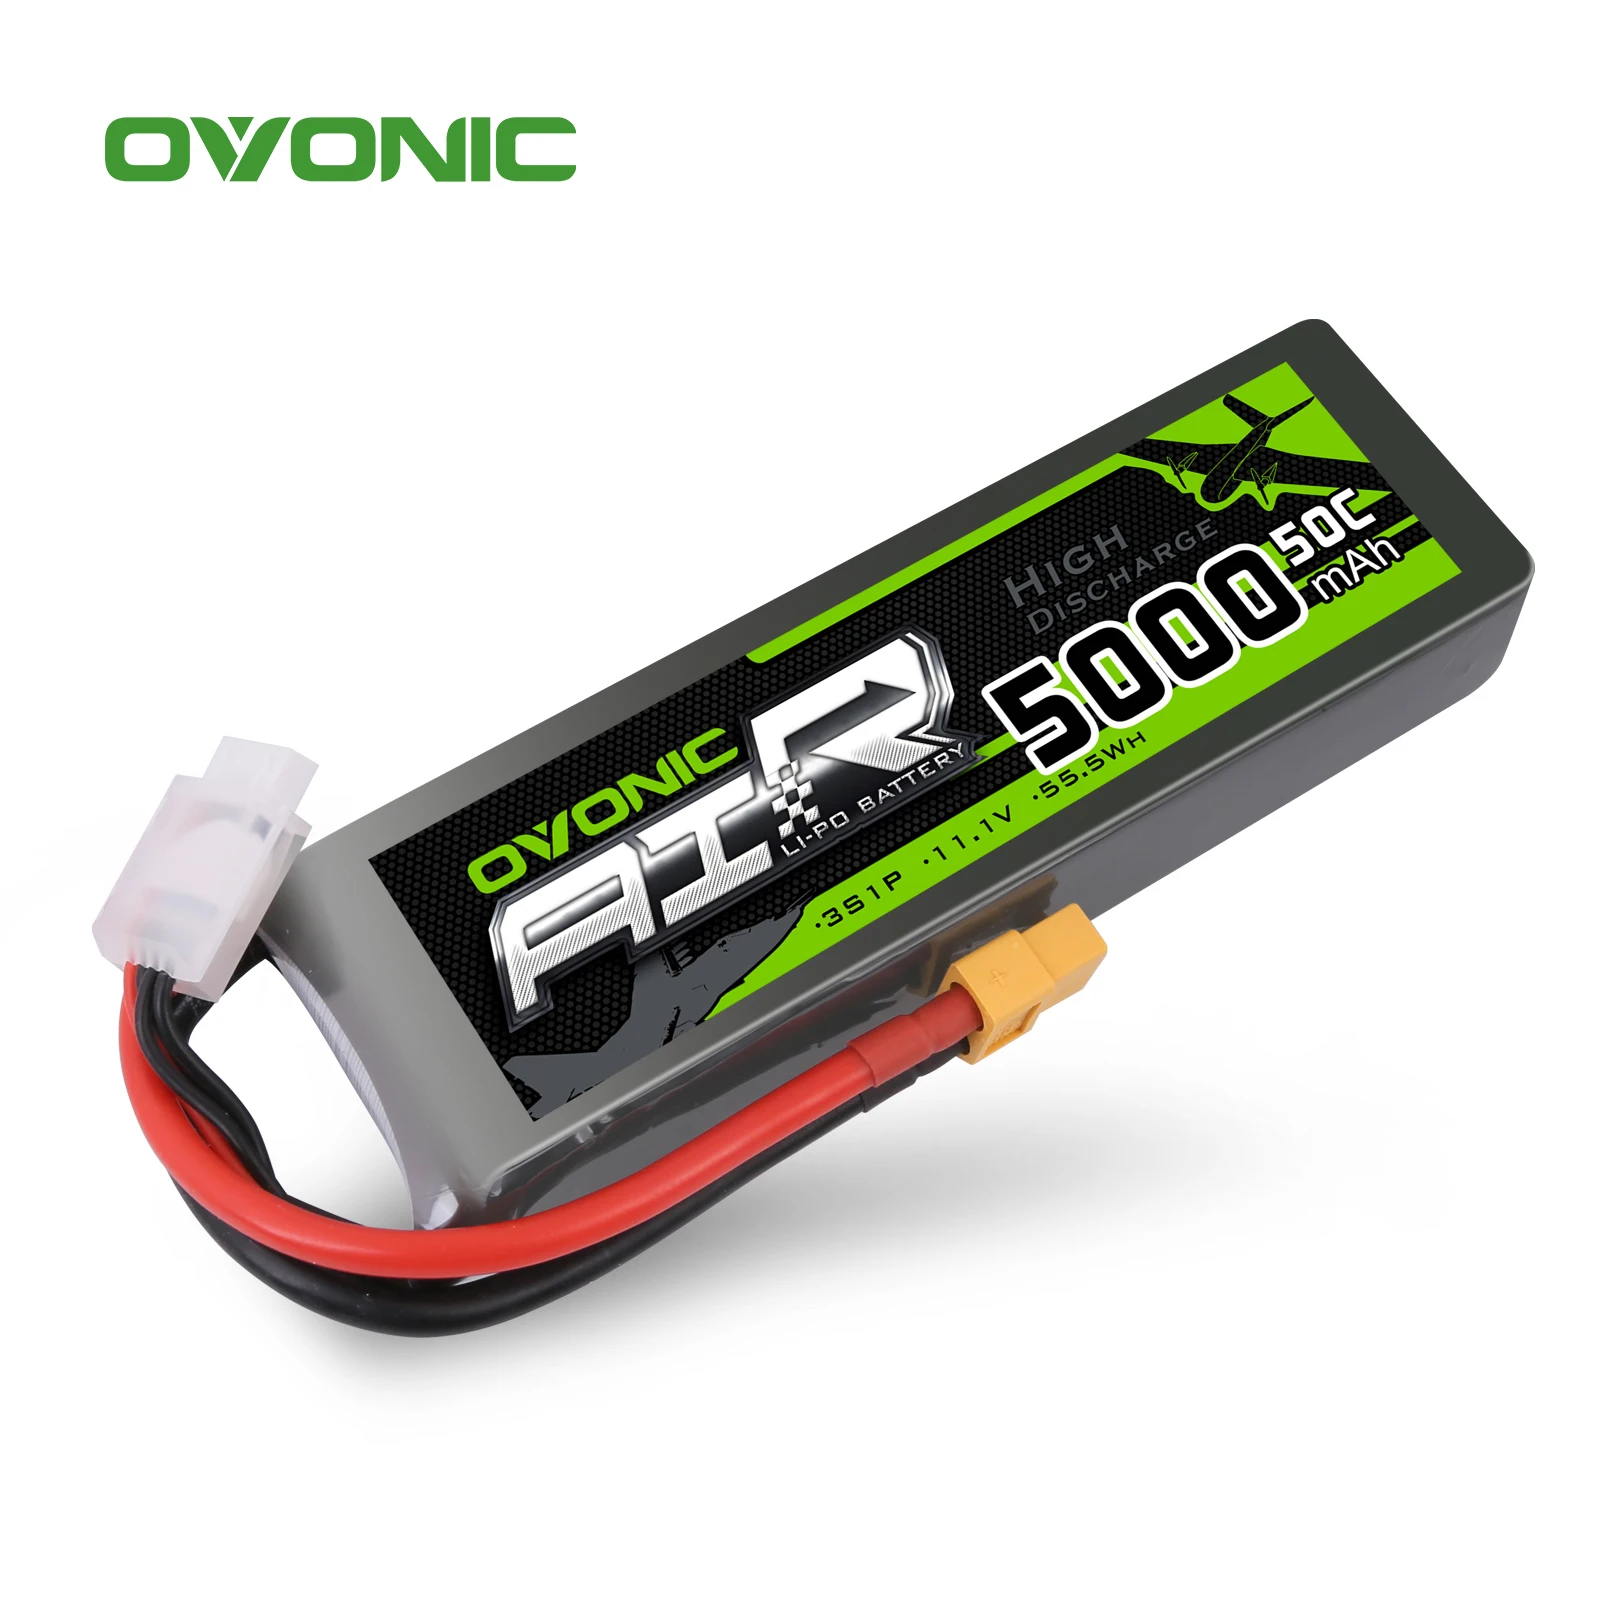 Ovonic 3s Lipo Battery 50C 5000mAh 11.1V Lipo Battery with XT60 Connector for RC Car Truck Boat Airplane Helicopter Quadcopter